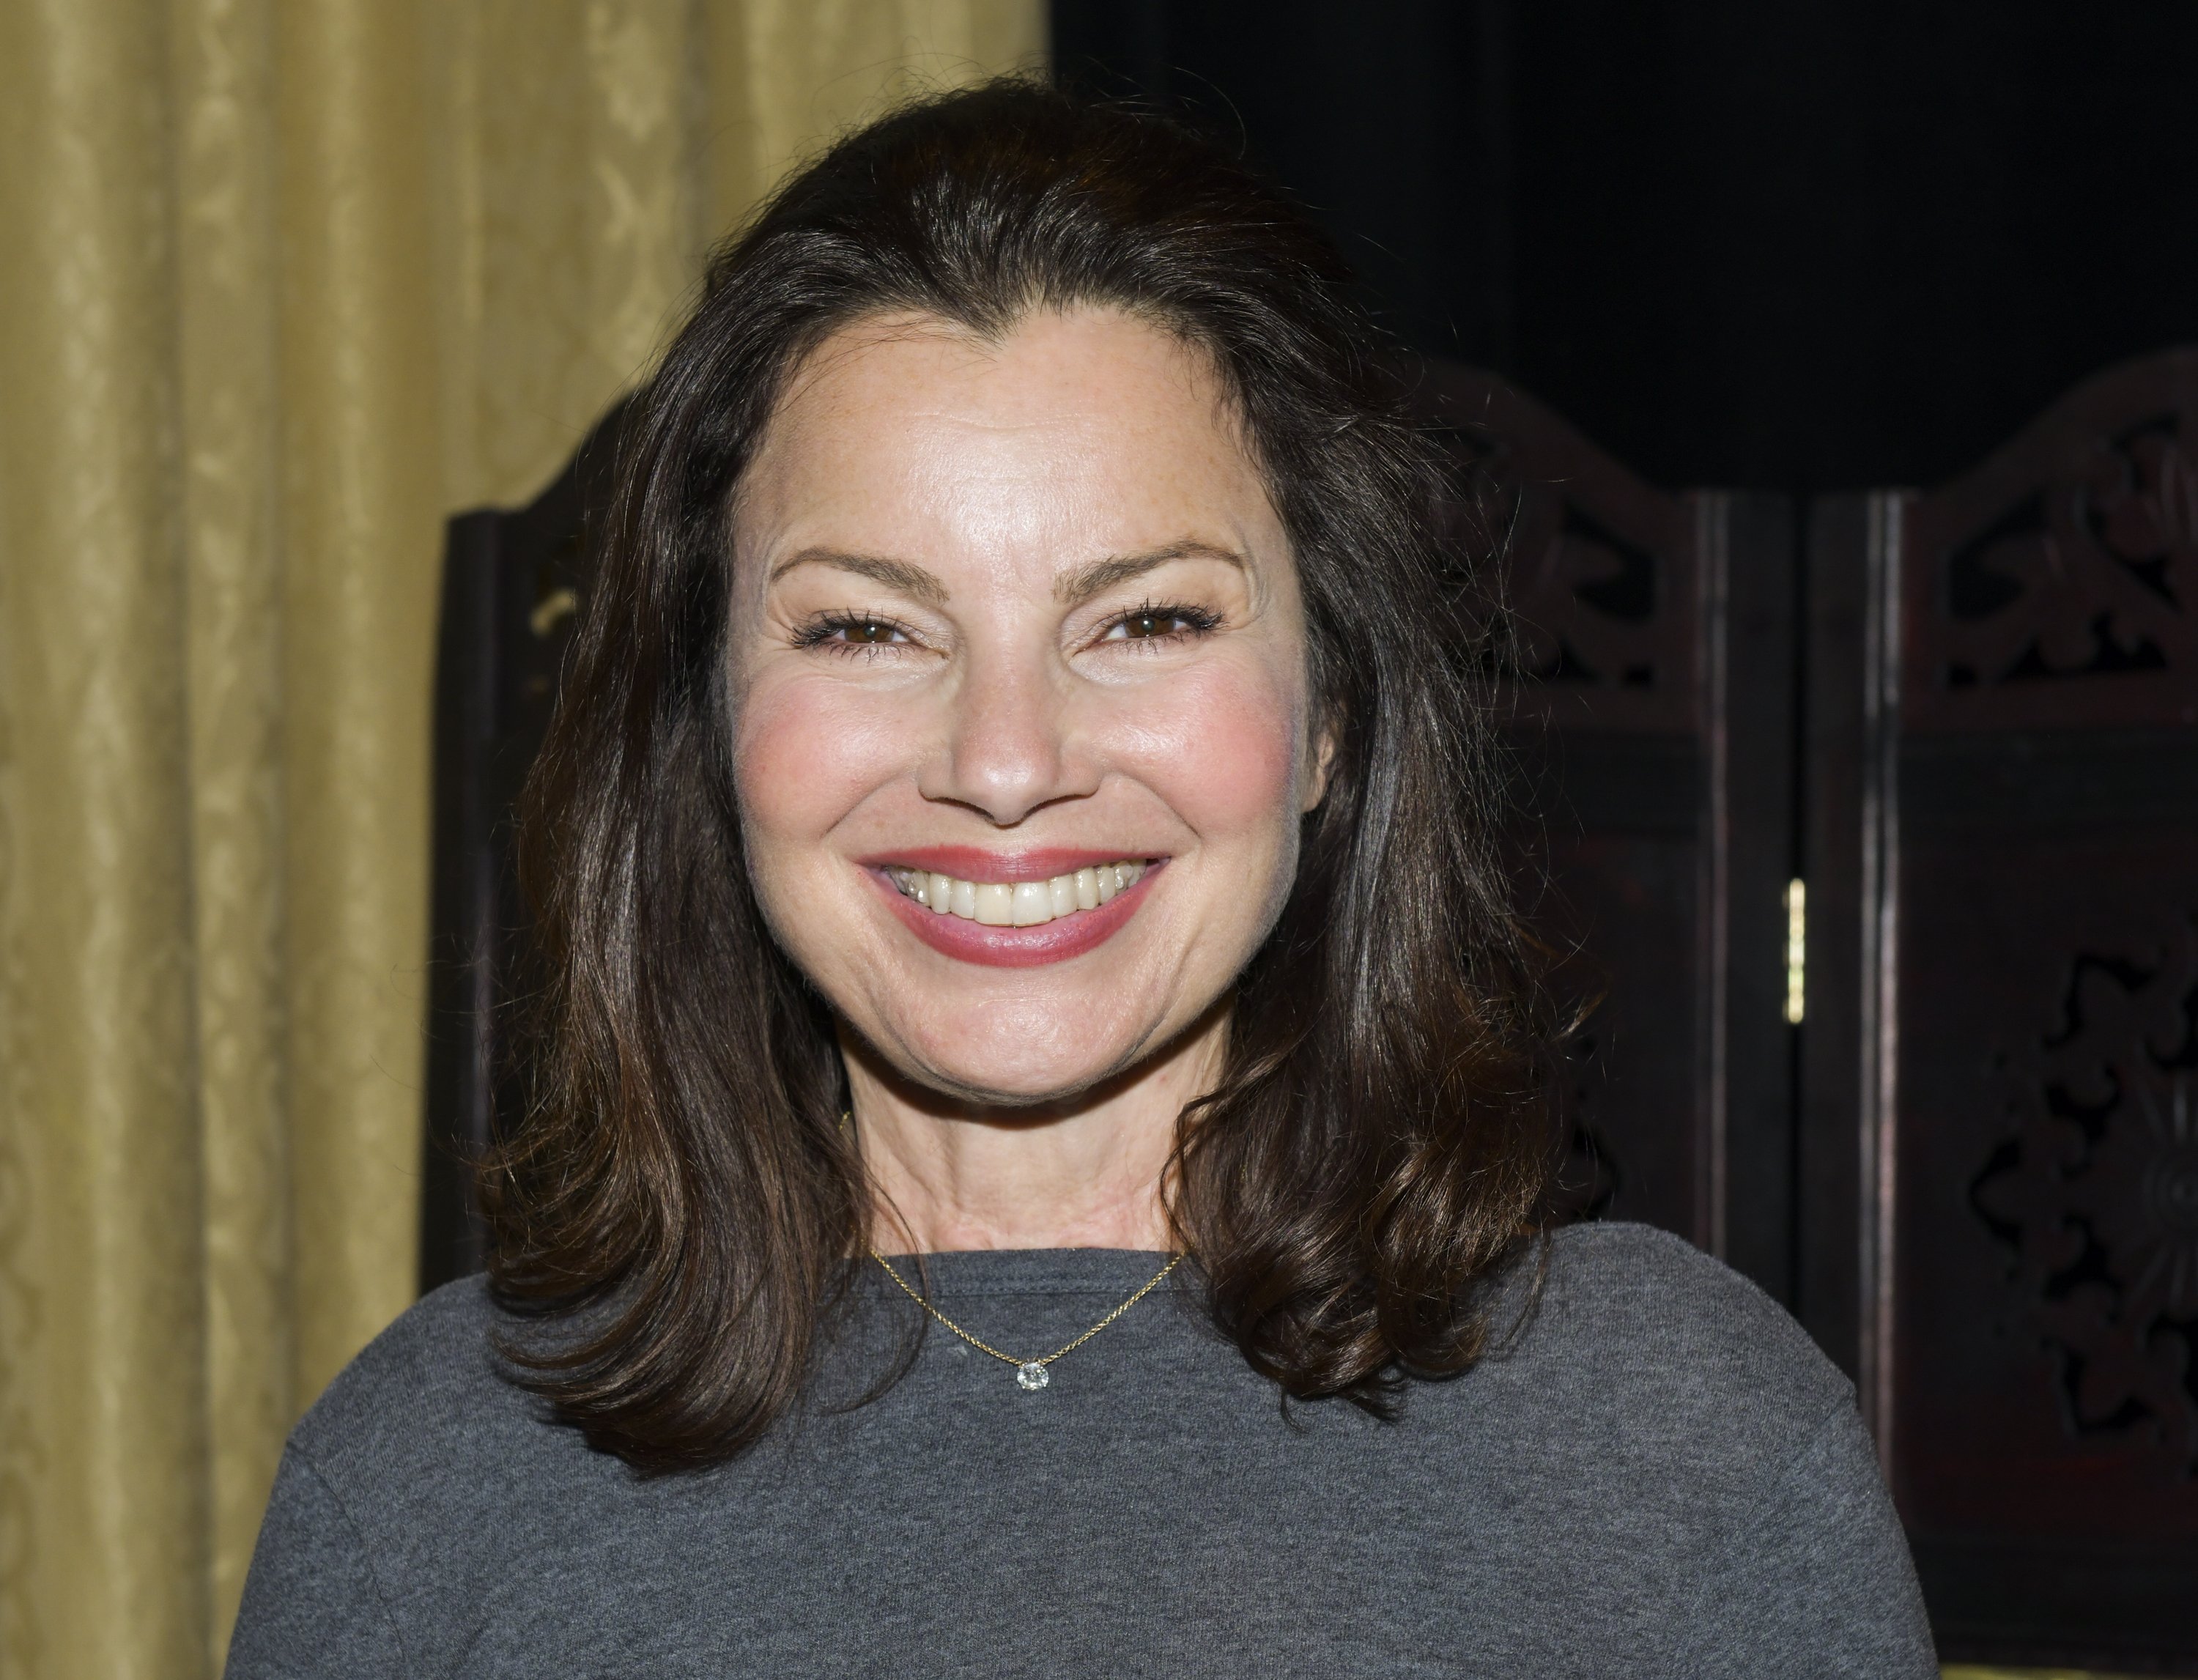 Fran Drescher at the Premiere of Renee Taylor's "My Life On A Diet" on April 05, 2019 | Photo: GettyImages